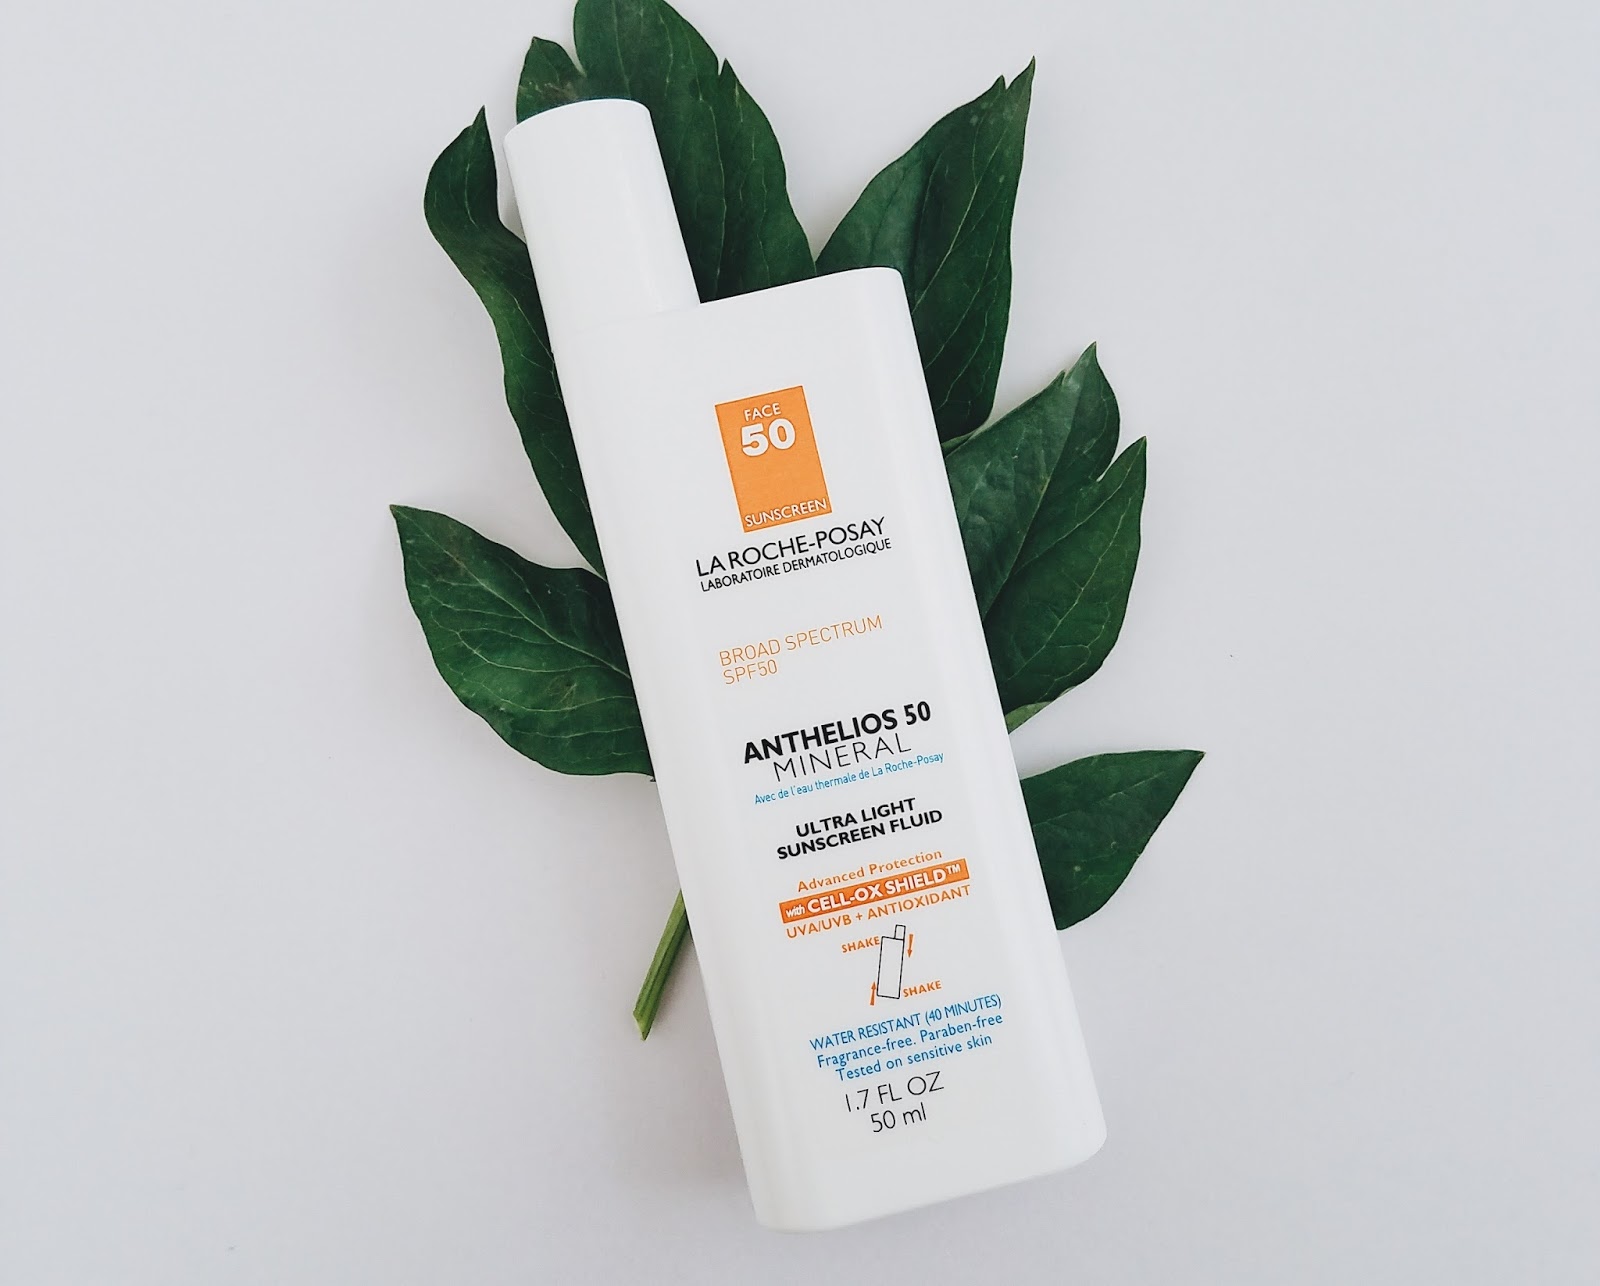 La Roche Posay Anthelios SPF 50 Mineral Sunscreen: Review by The Jen Project. Great for sensitive skin, products from UVA and UVB rays, dries to a velvety finish but doesn't dry out skin like other mineral/physical sunscreens do.